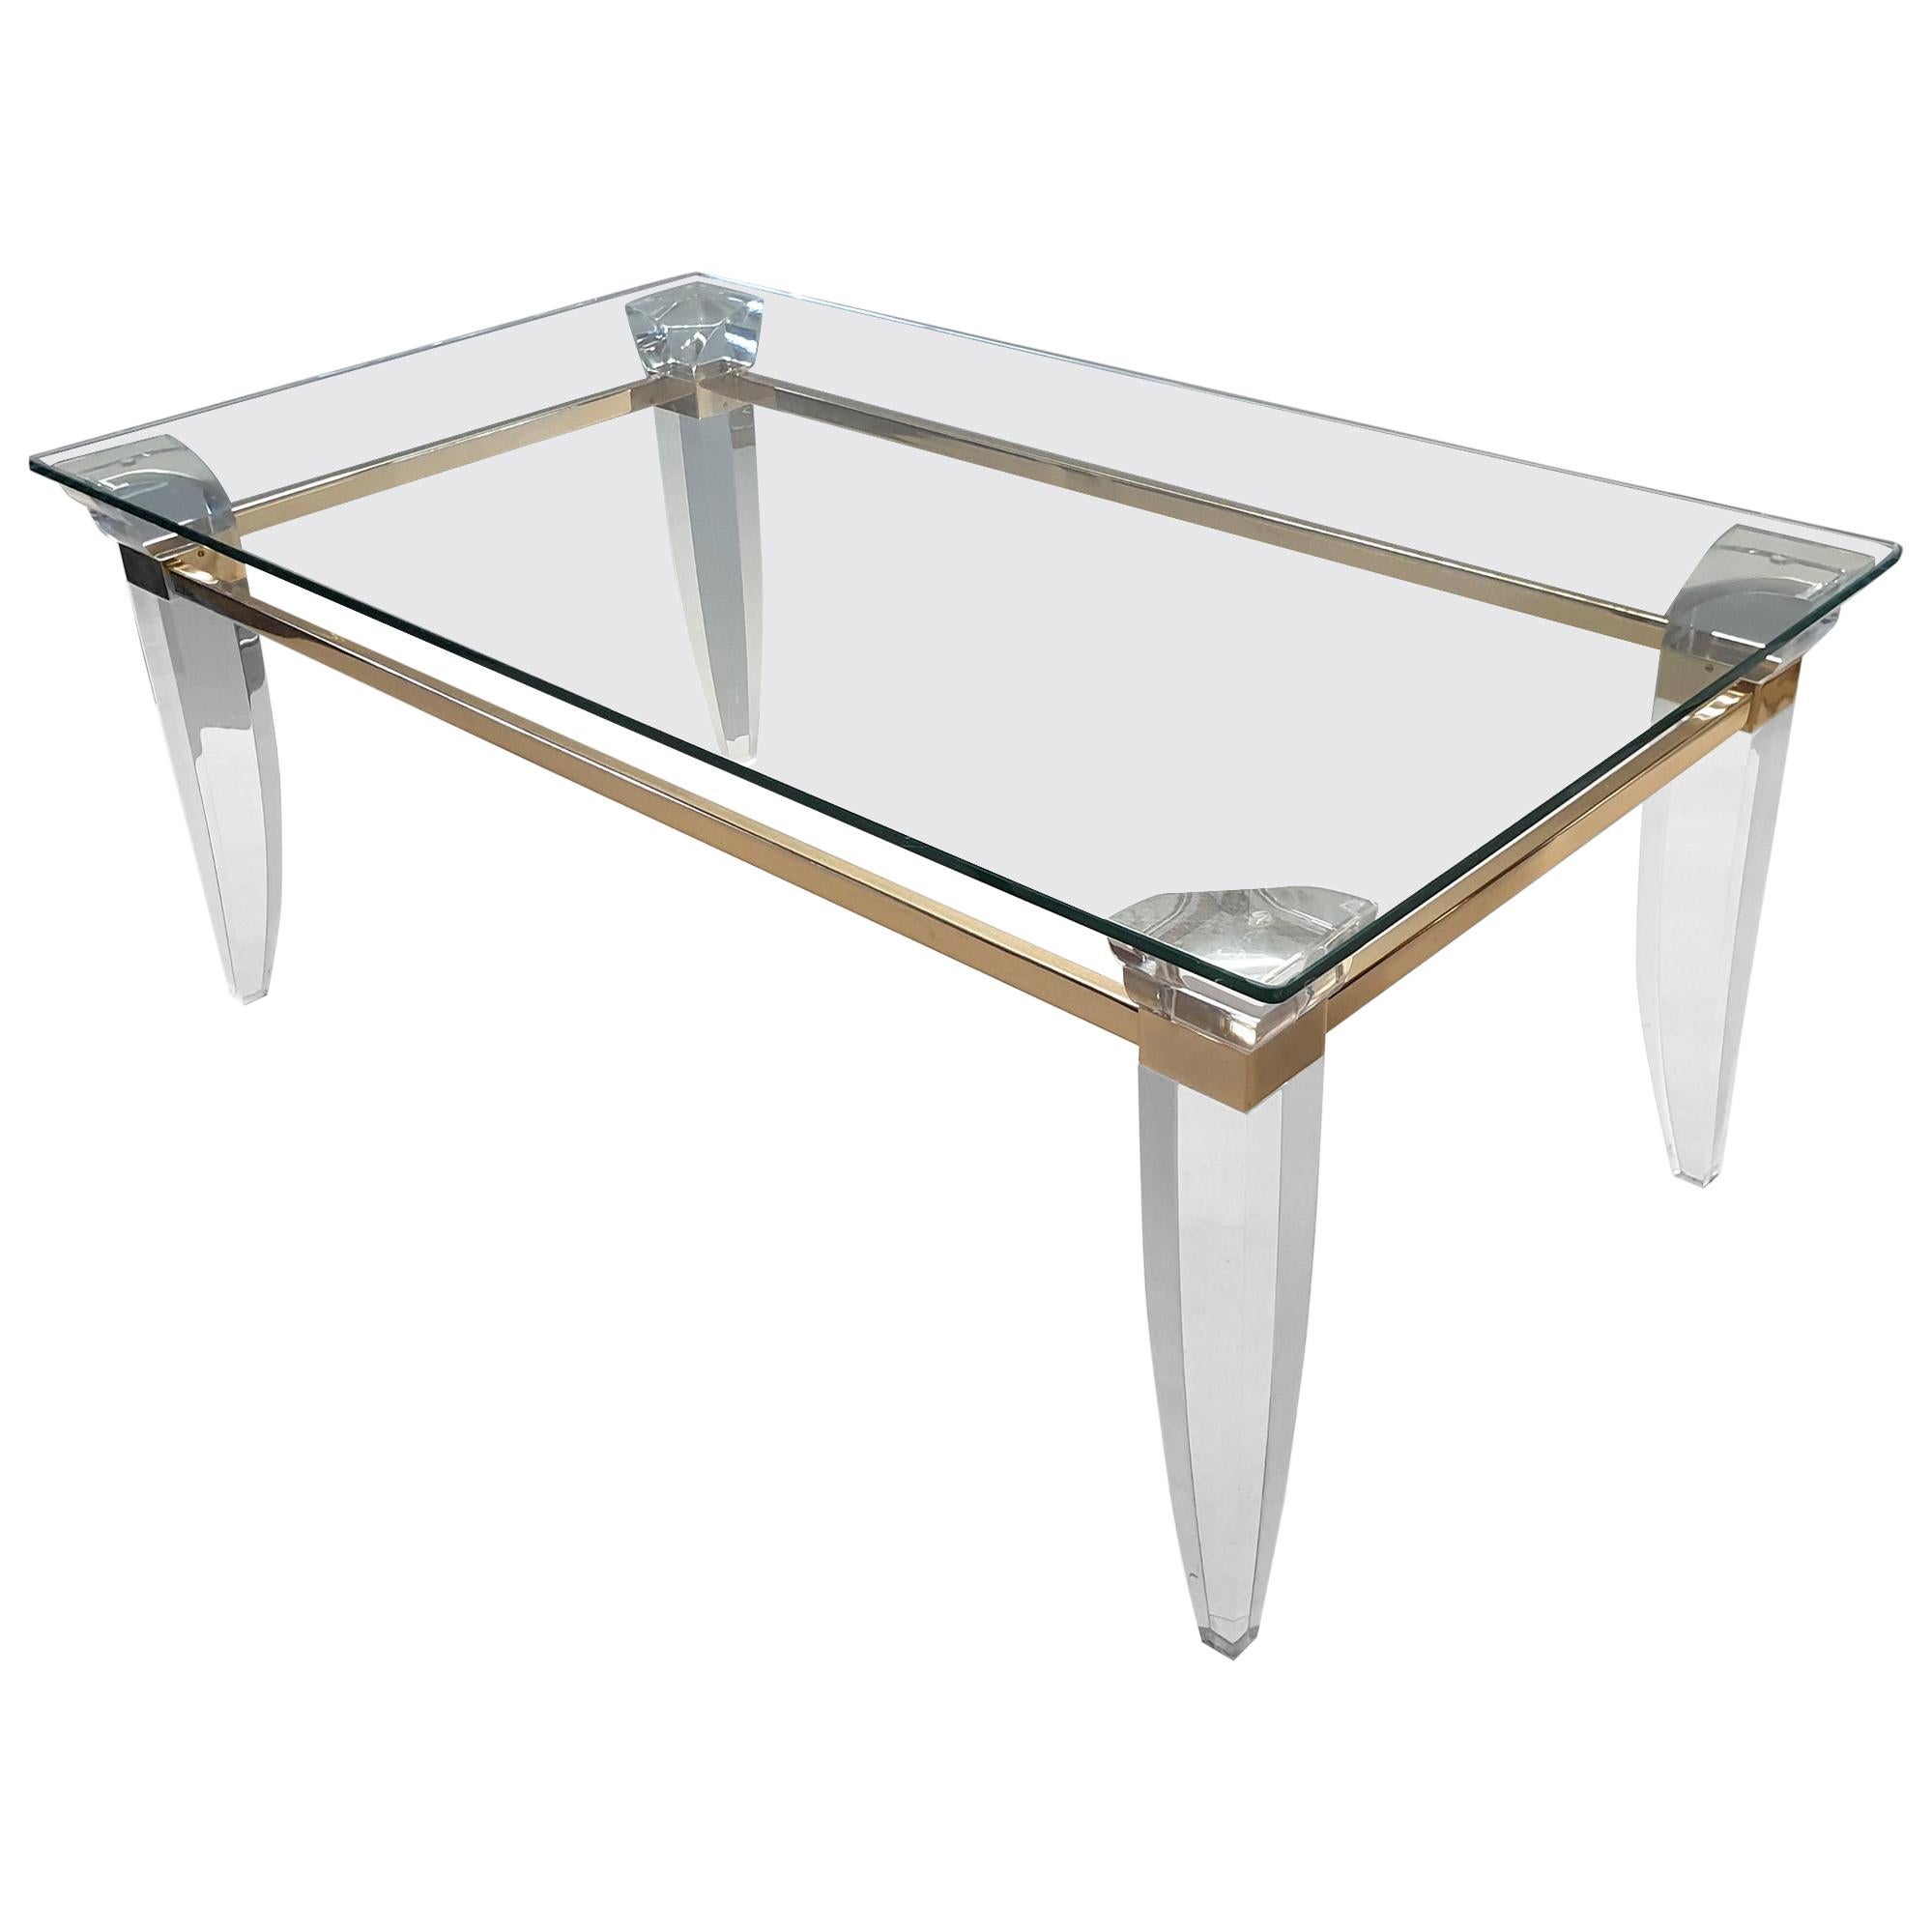 Lucite, Gold Plating and Glass Coffee Table with Assymetrical Table Legs, 1980s For Sale